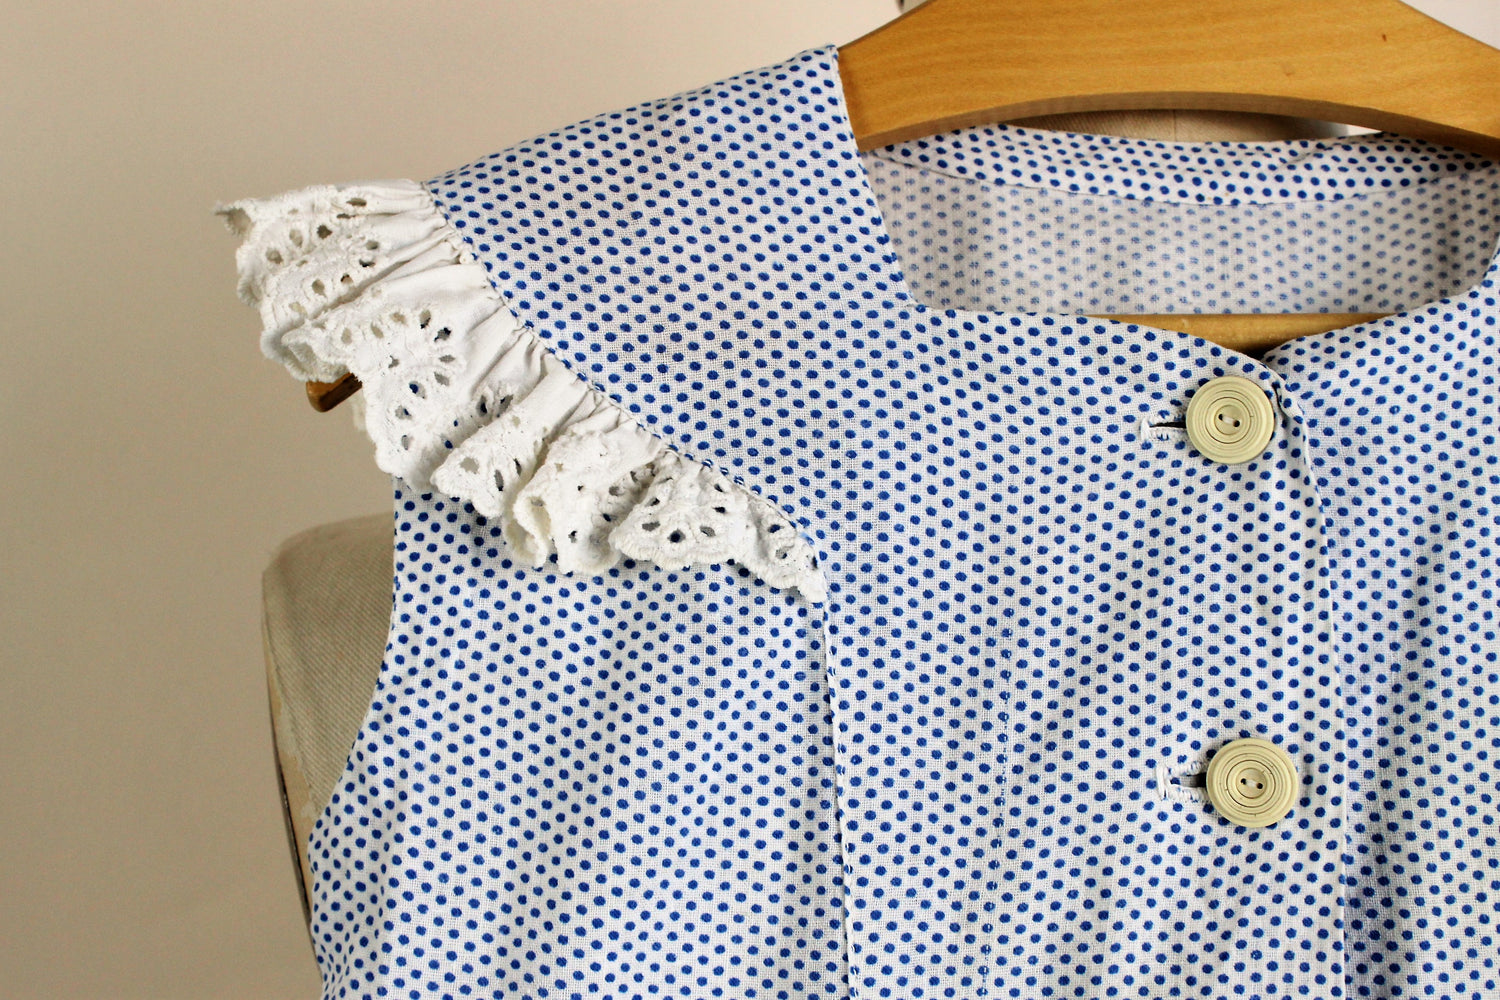 Vintage 1950s Blue And White Polkadot Cotton Baby Girl's Frock